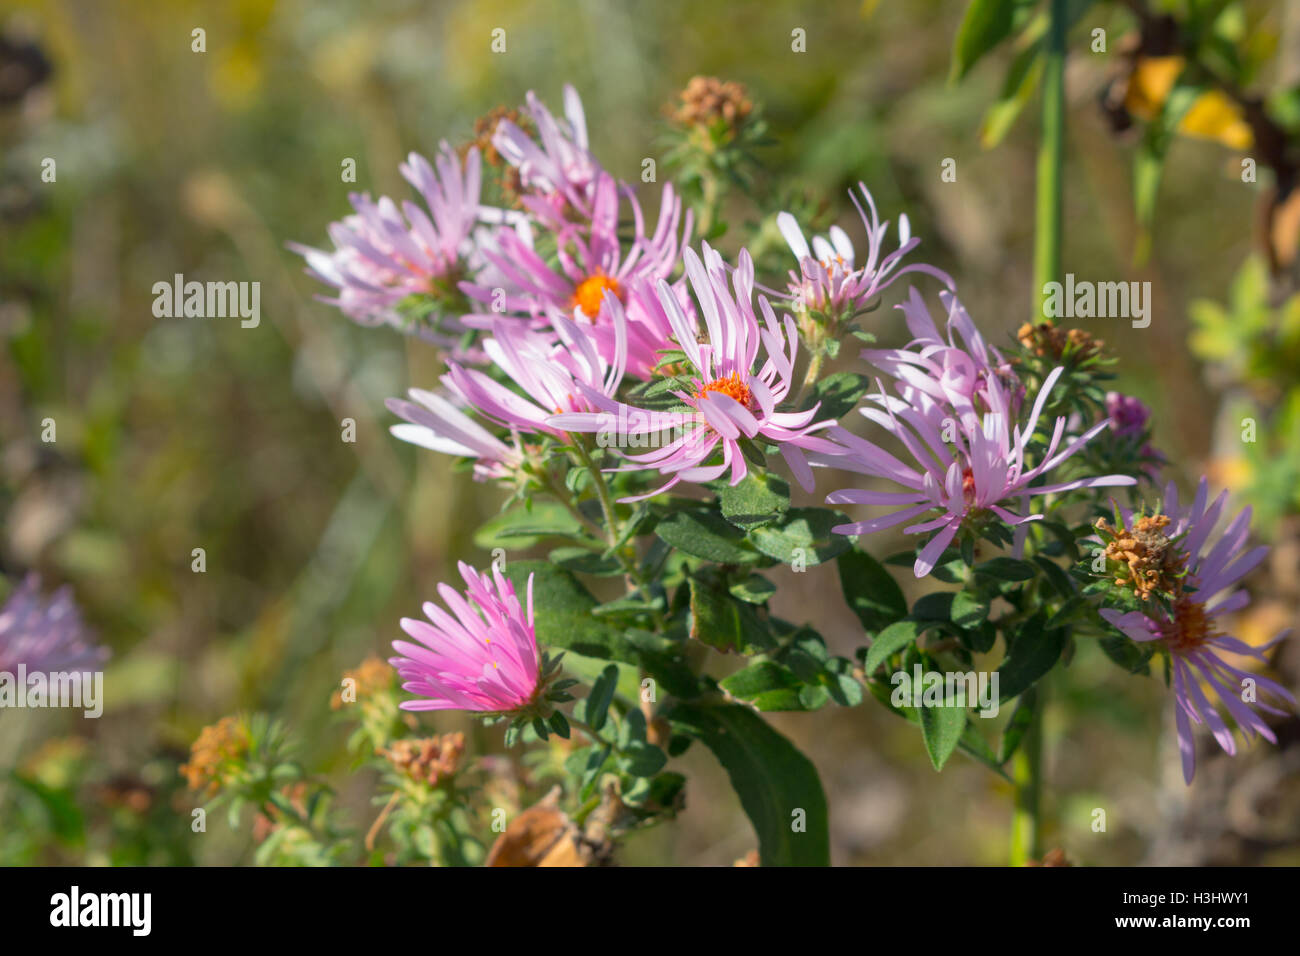 Wild pink New England asters (Symphyotrichum novae-angliae) blooming in a field, Indiana, United States Stock Photo